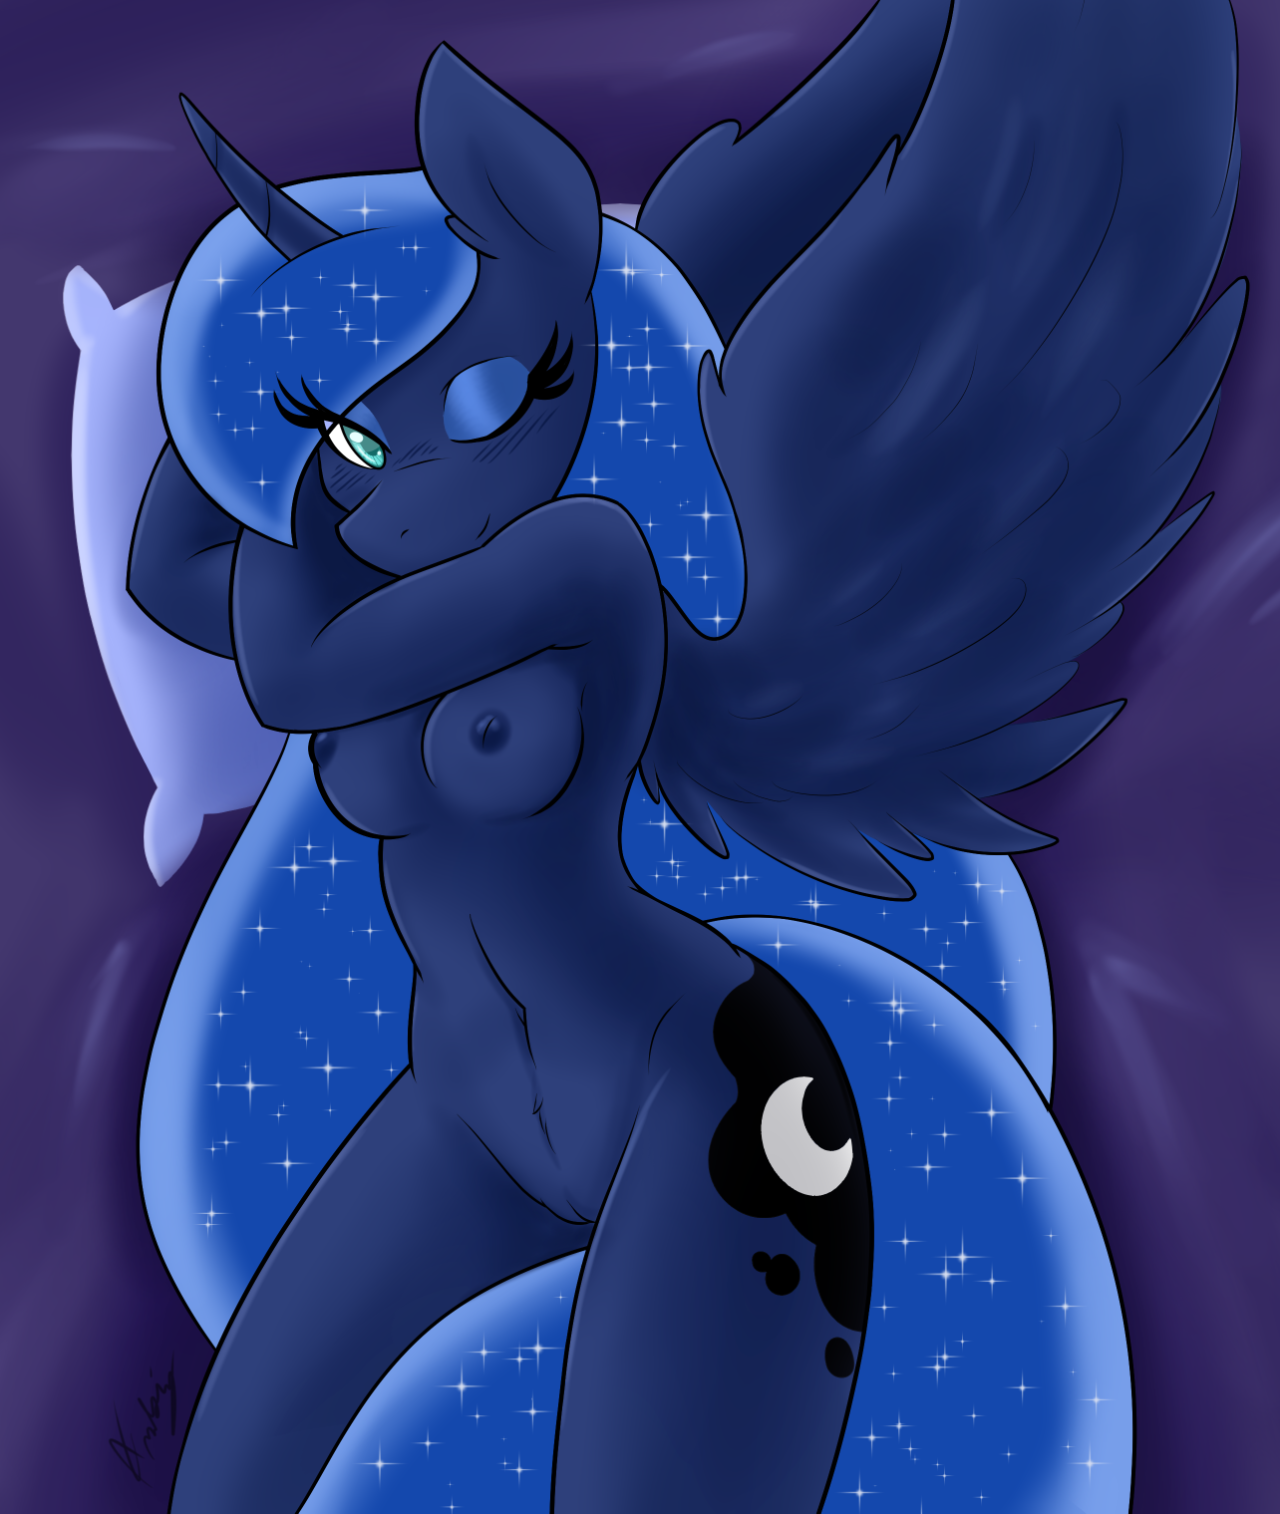 needs-more-butts:  I had a fun idea for a sleepy Luna on her bed, maybe slightly